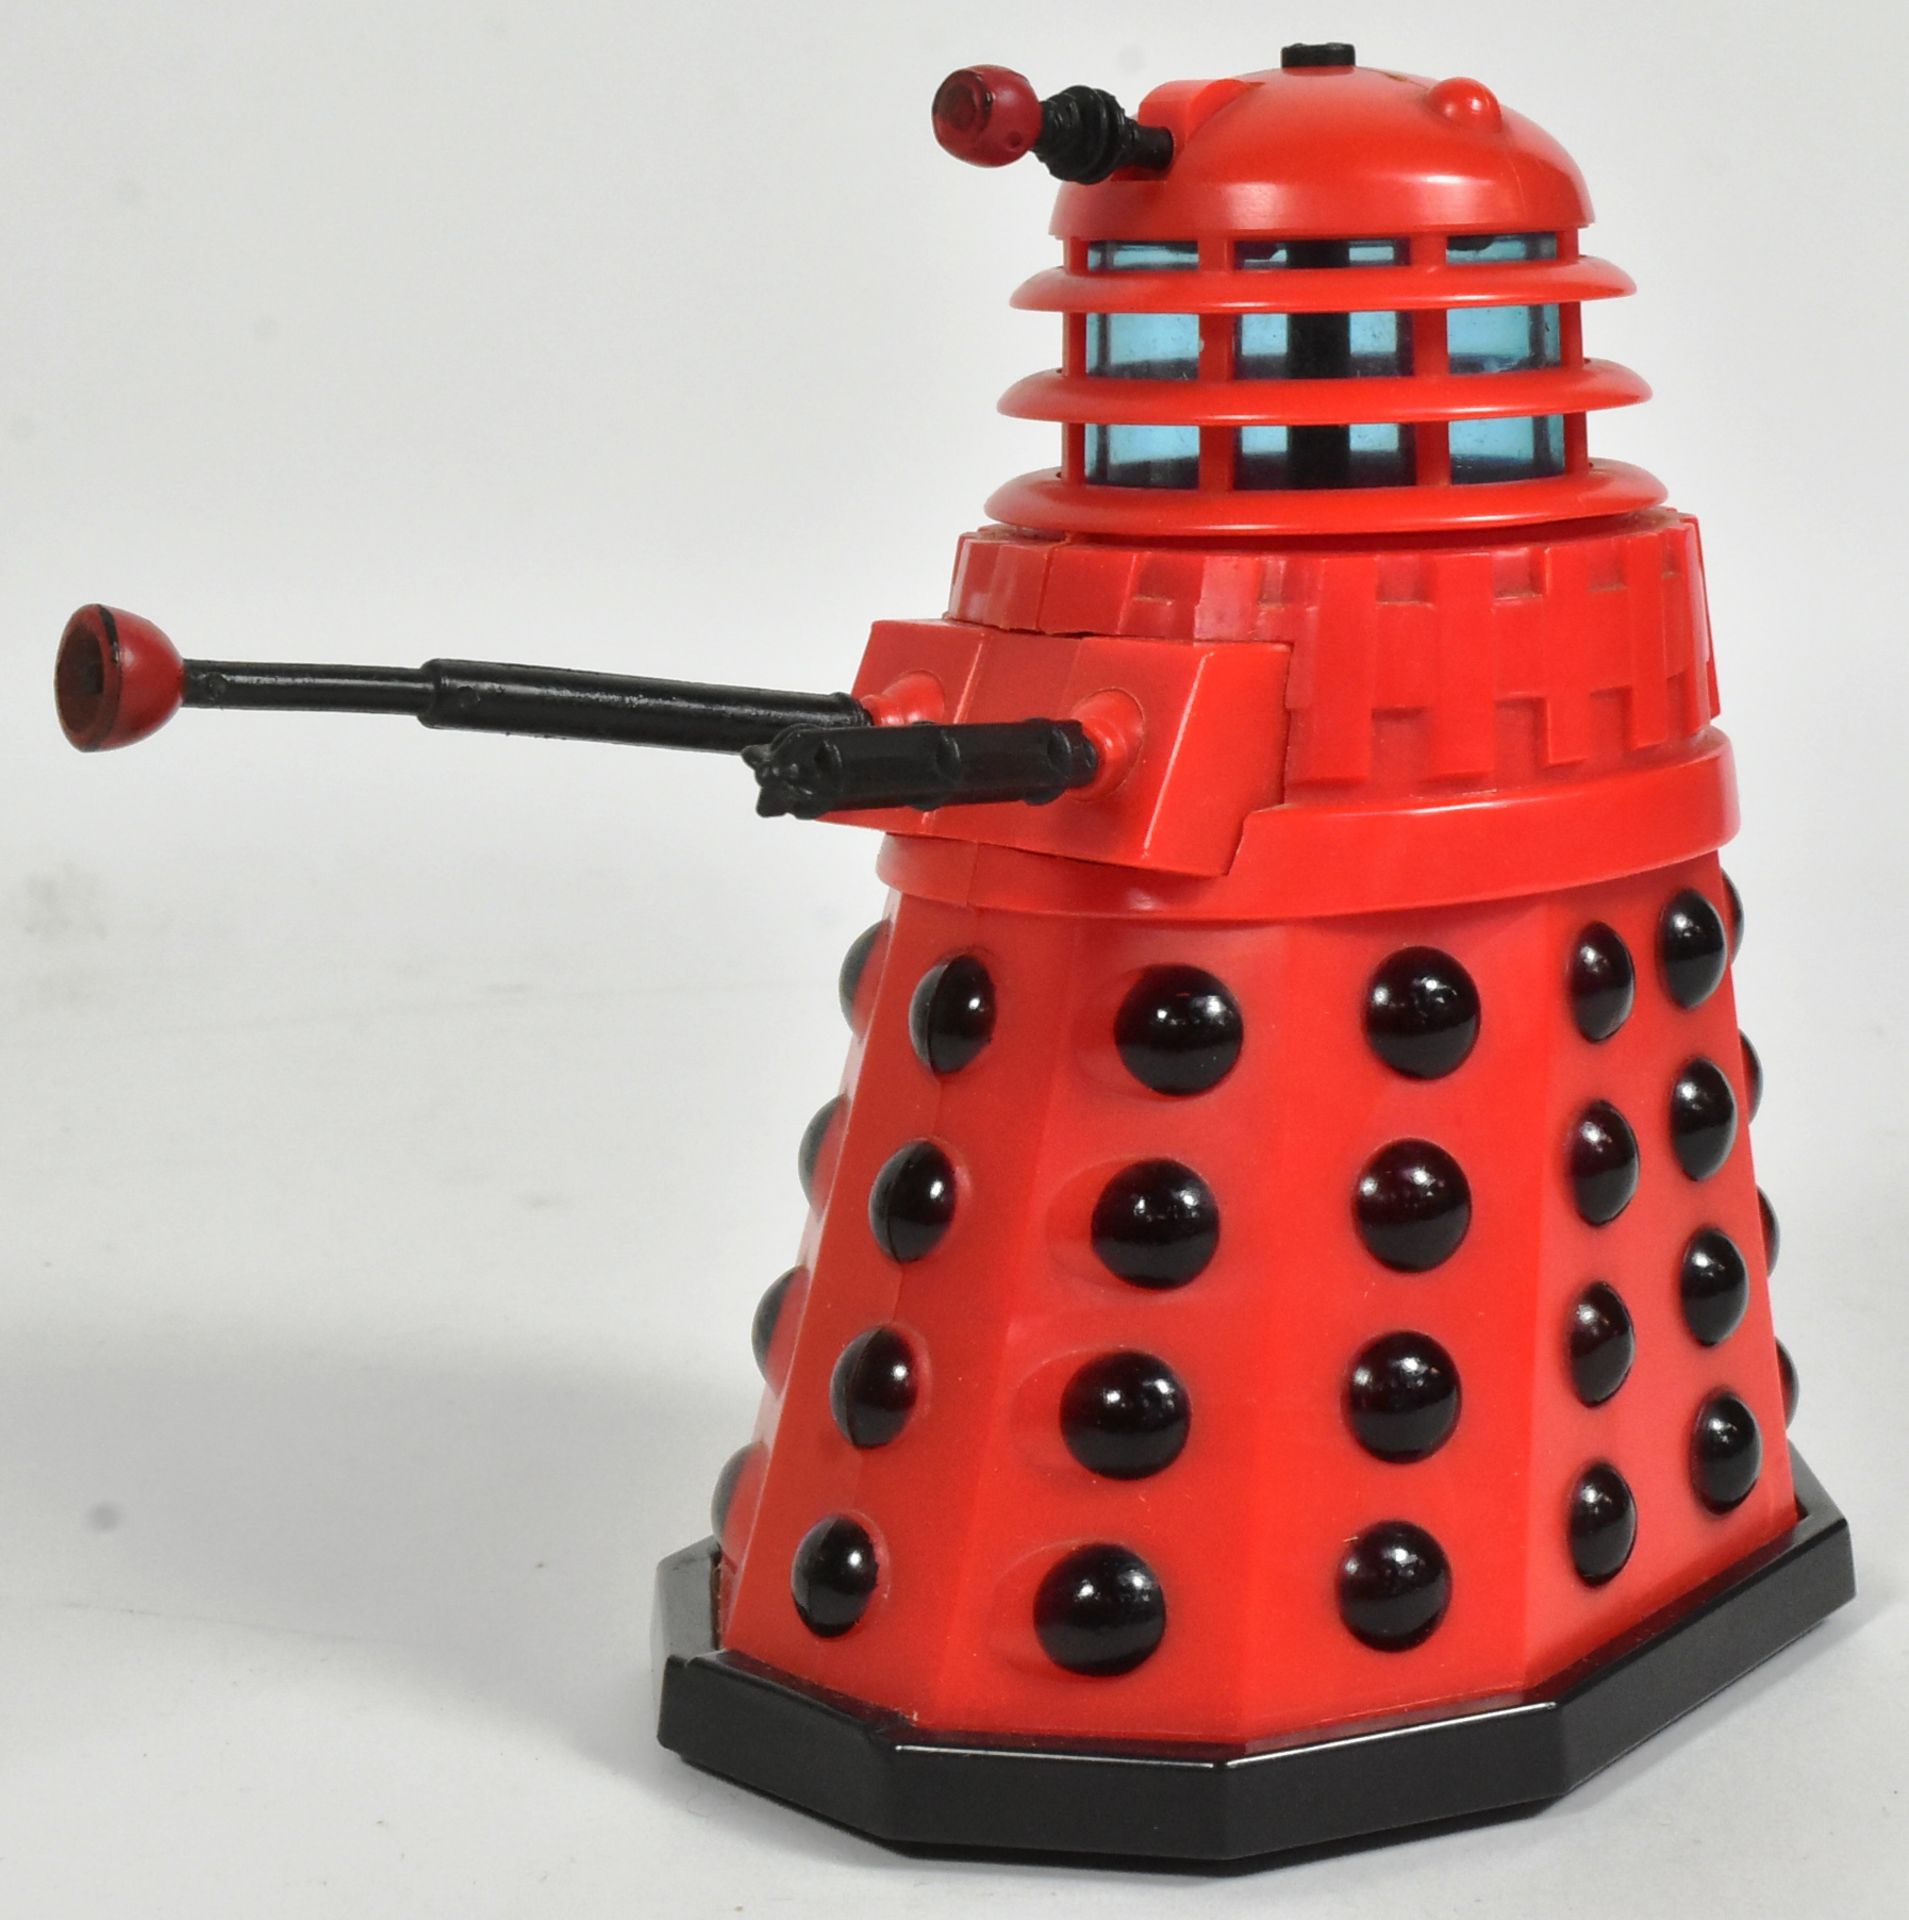 DOCTOR WHO - VINTAGE BBC TALKING DALEK TOY BY PALITOY - Image 2 of 6